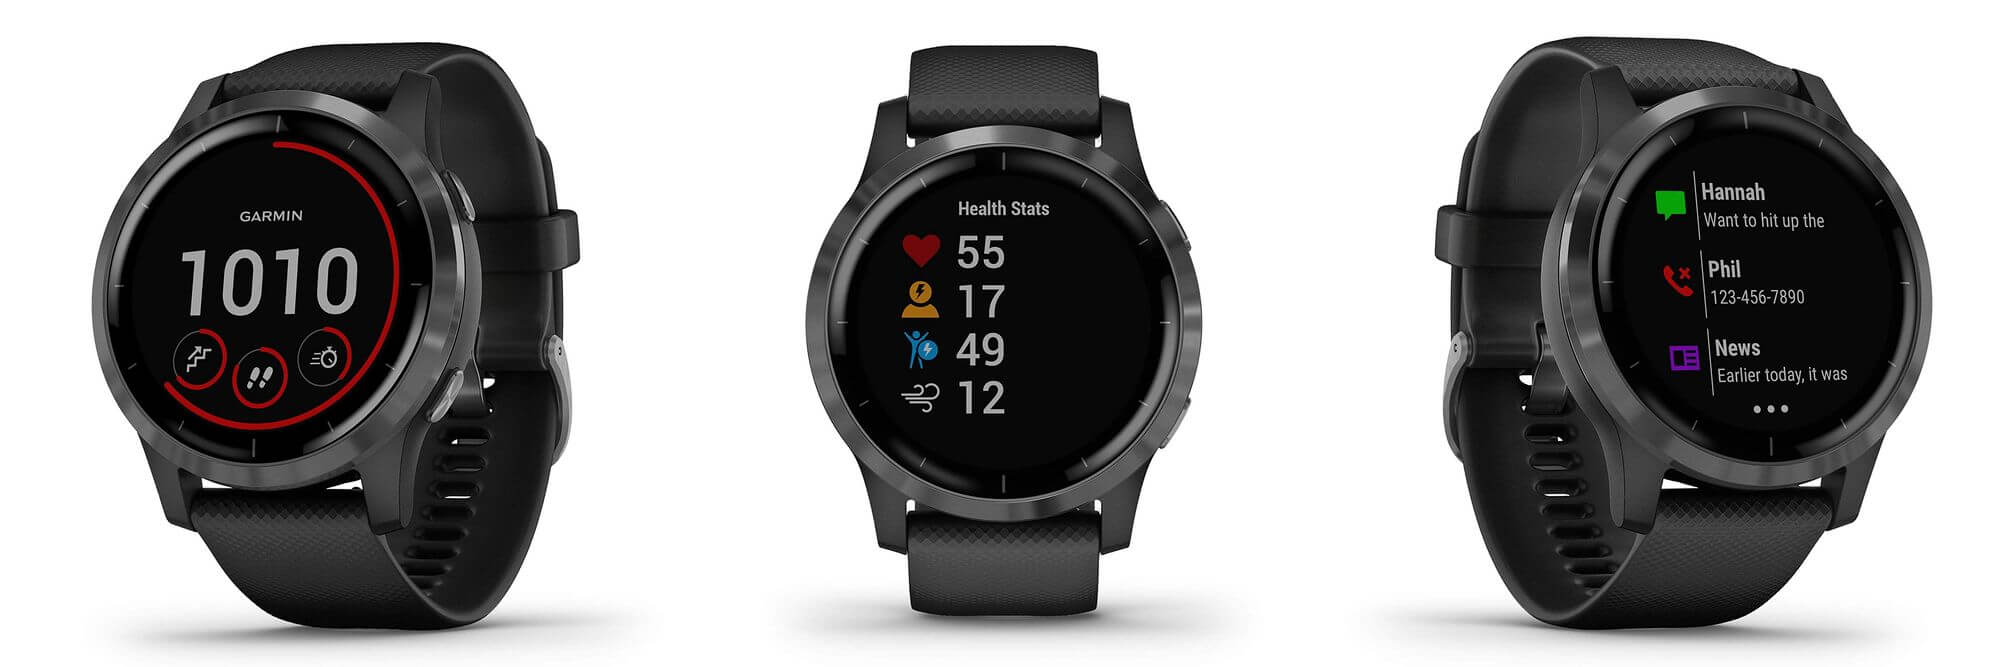 Garmin vivoactive 4 - Fitness smartwatch with sophisticated health tracking